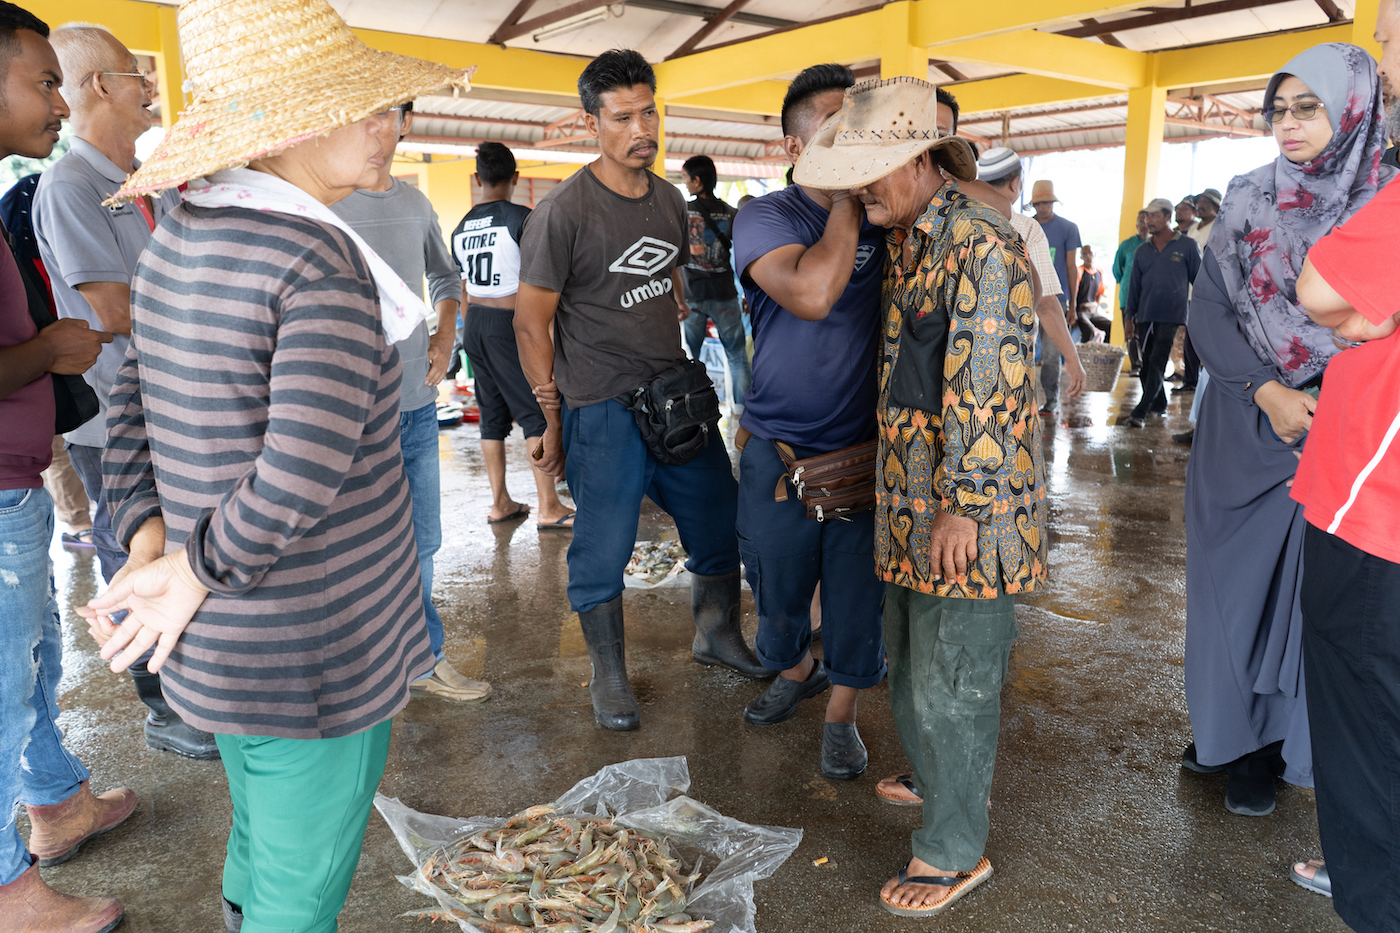 Pasar Bisik Kuala Muda gets its name from the whispering tradition observed at its seafood auctions